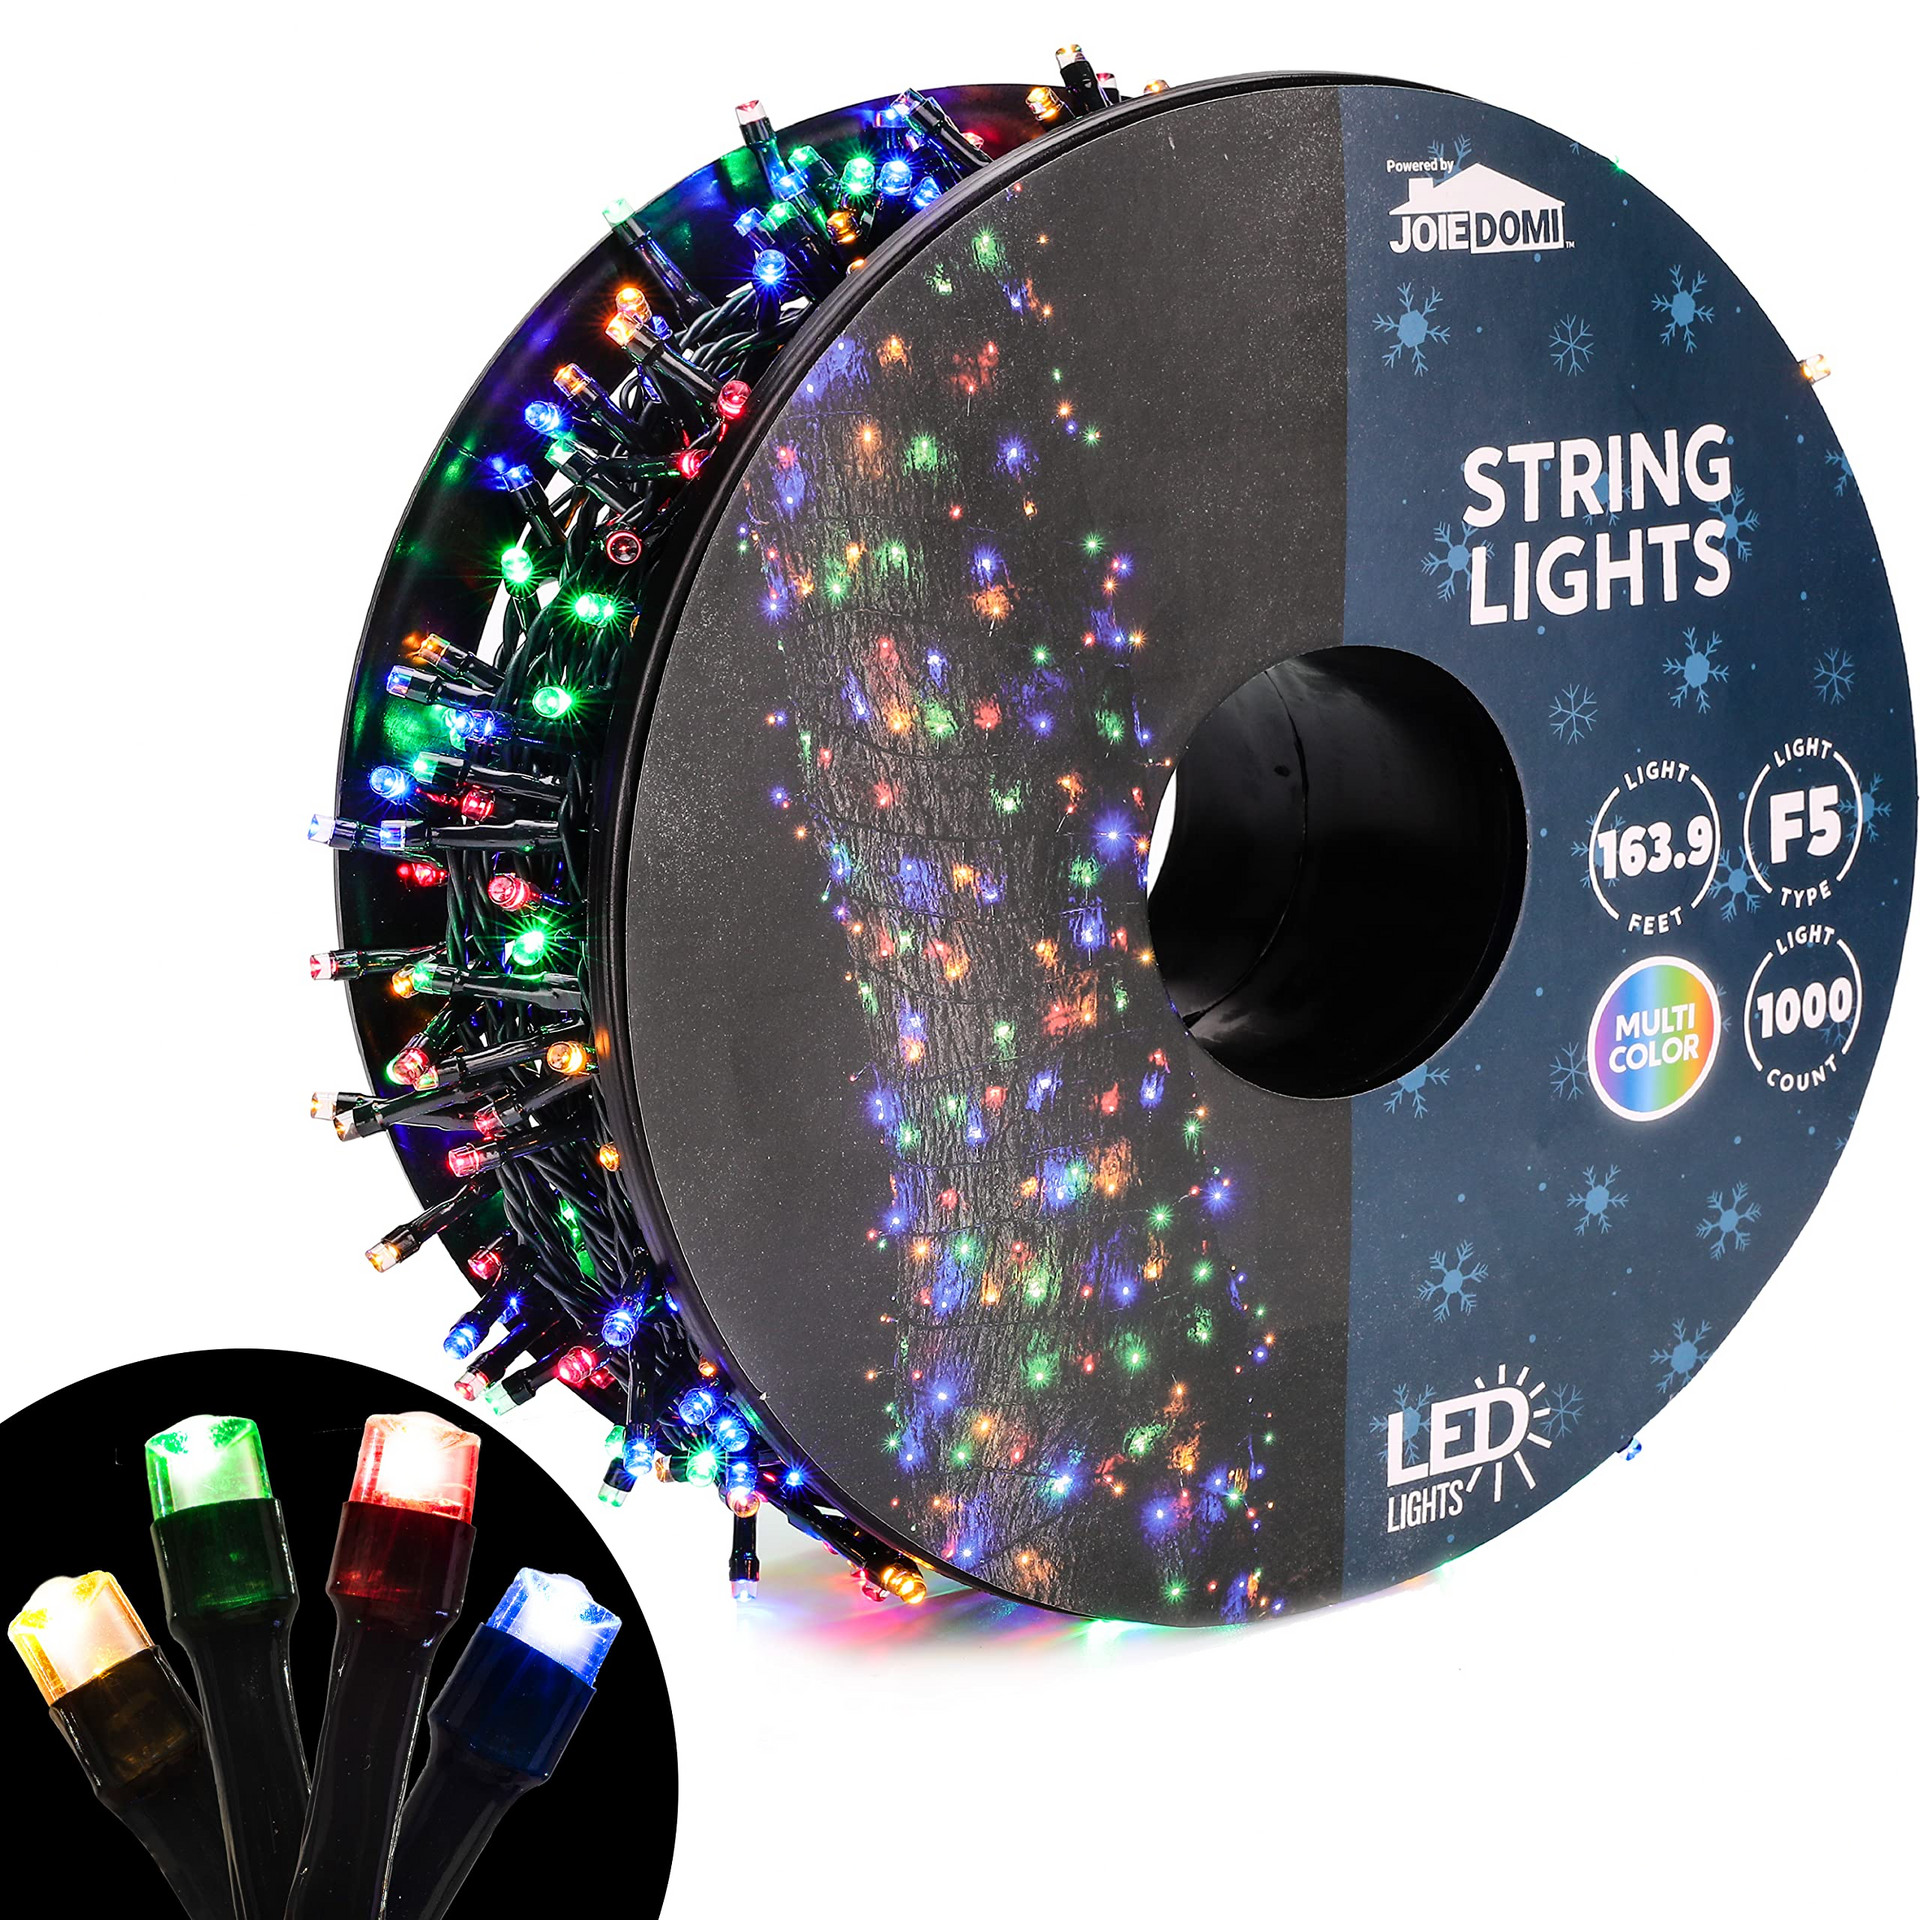 1000 LED Christmas String Lights Multicolor - Joiedomi